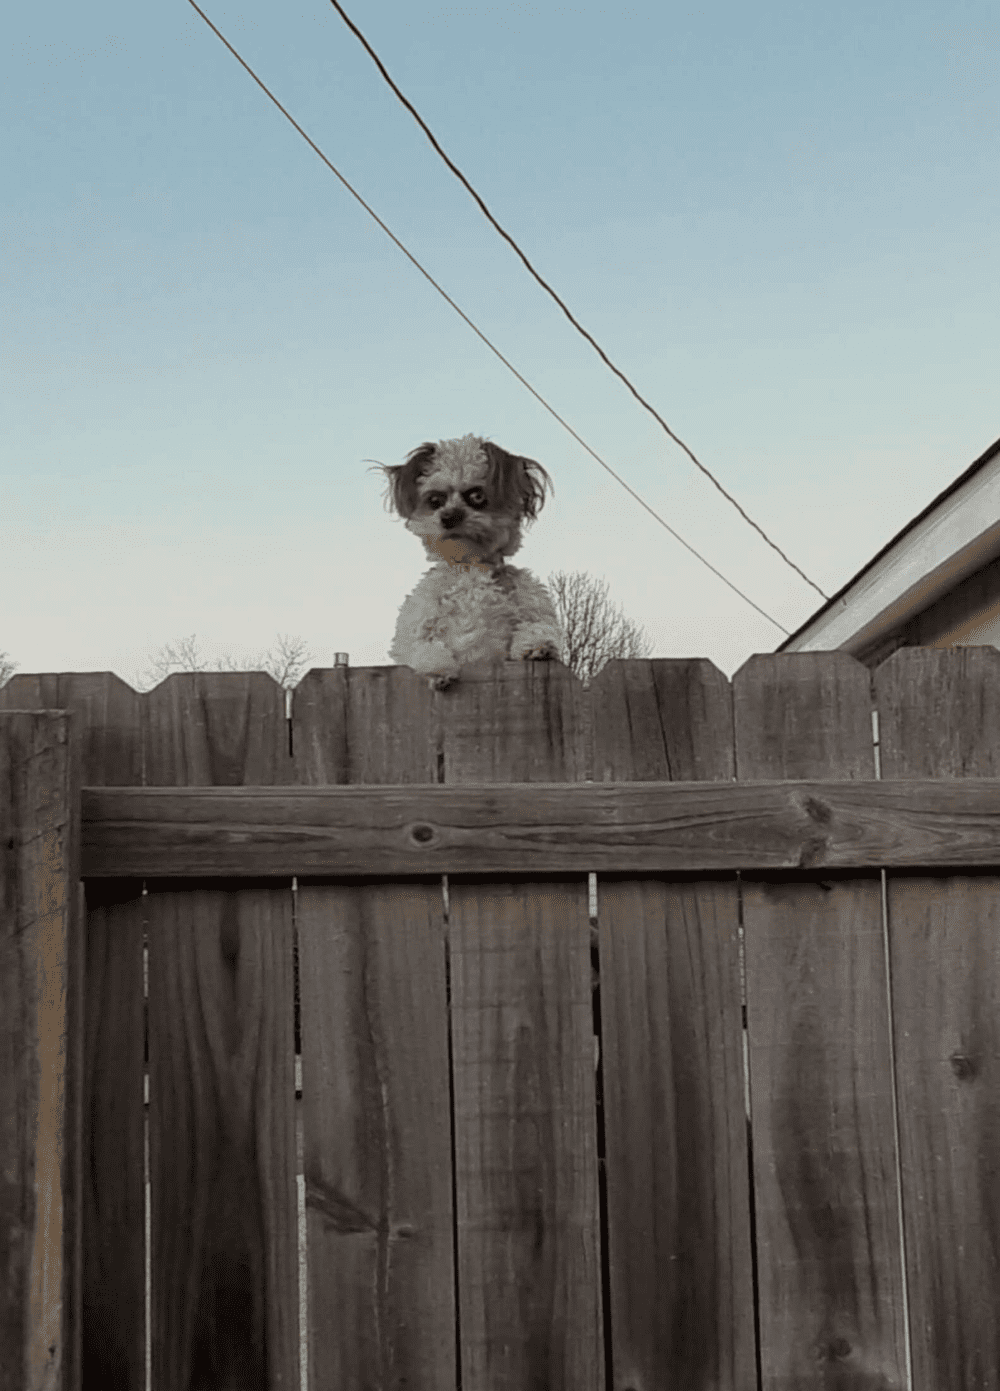 This Little Dog Peeking Over A Fence Is Making People Uncomfortable